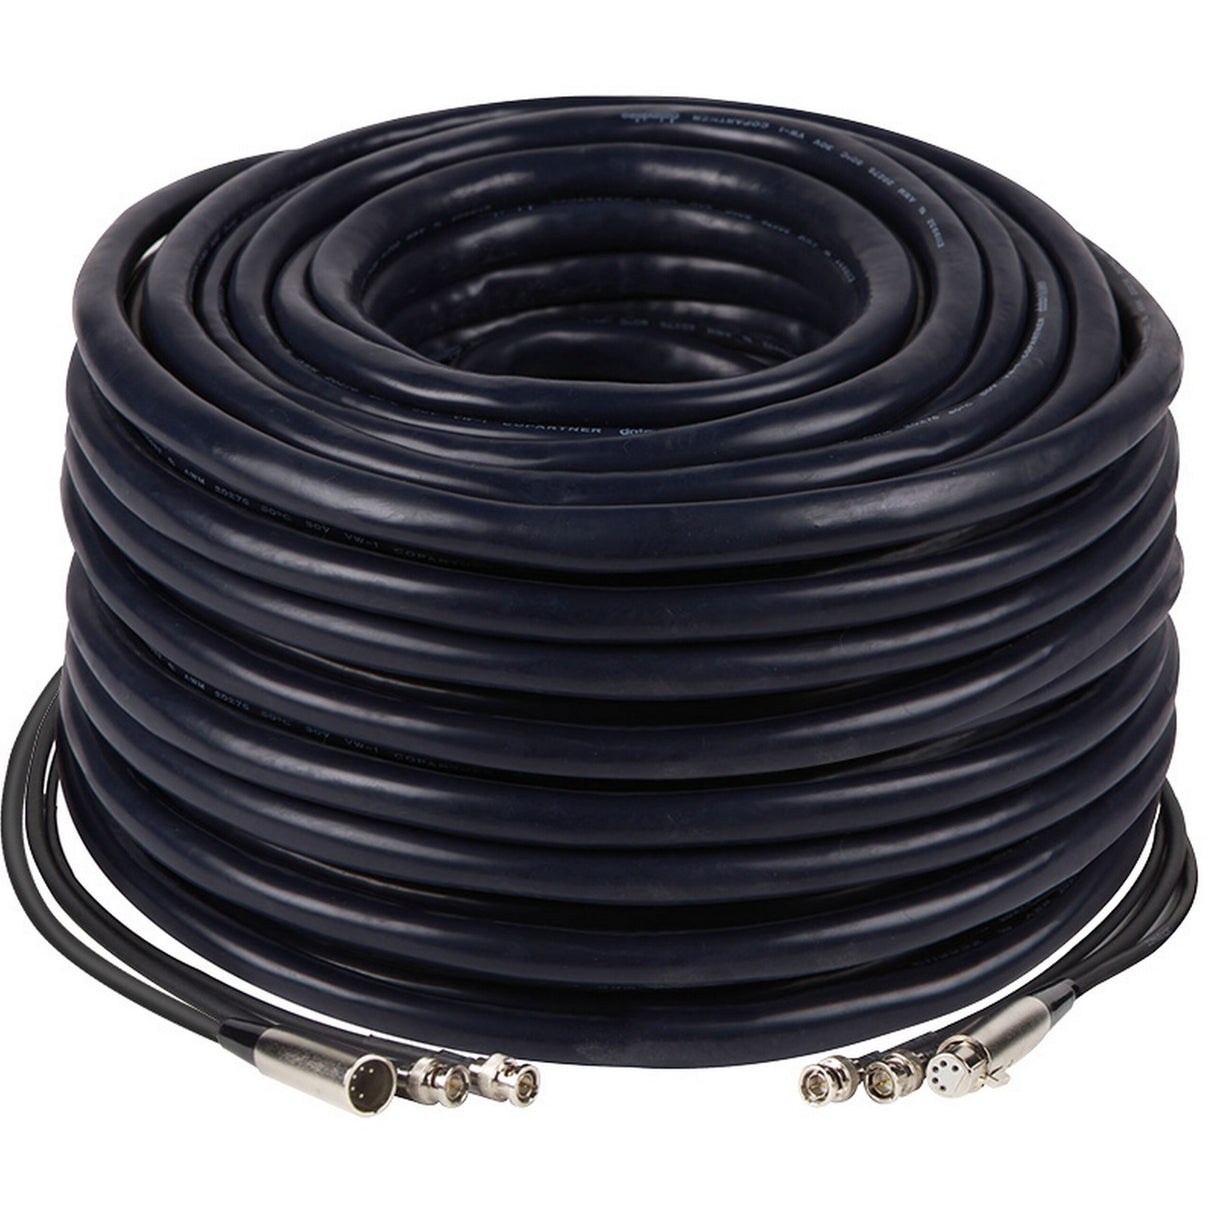 Datavideo CB-24 All-in-One Cable for SD-SDI and CVBS MVS Systems